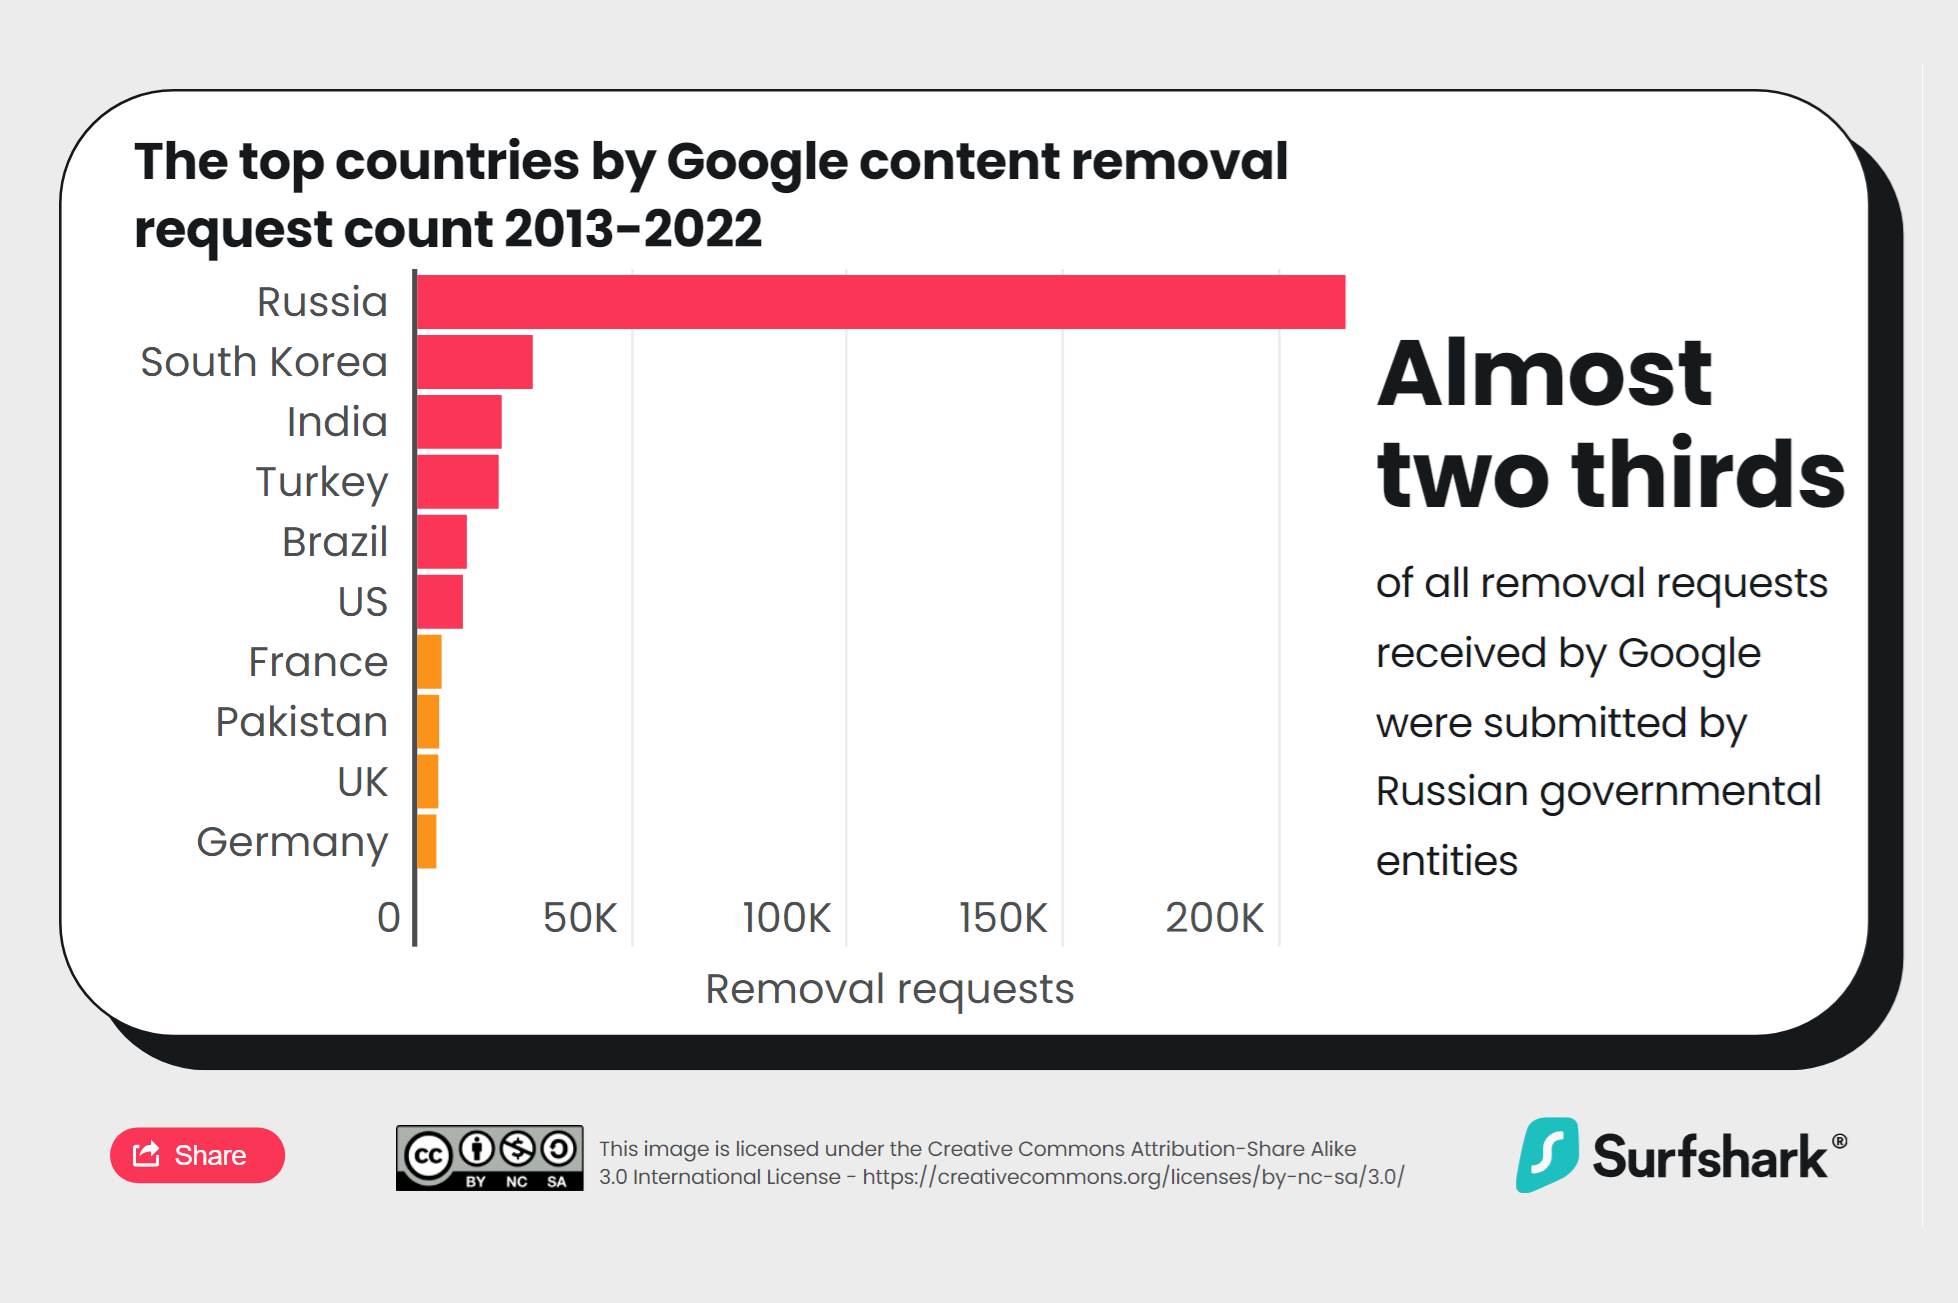 Google's Data Shows: Russia Major Contributor to Content Removal Requests, with 61%